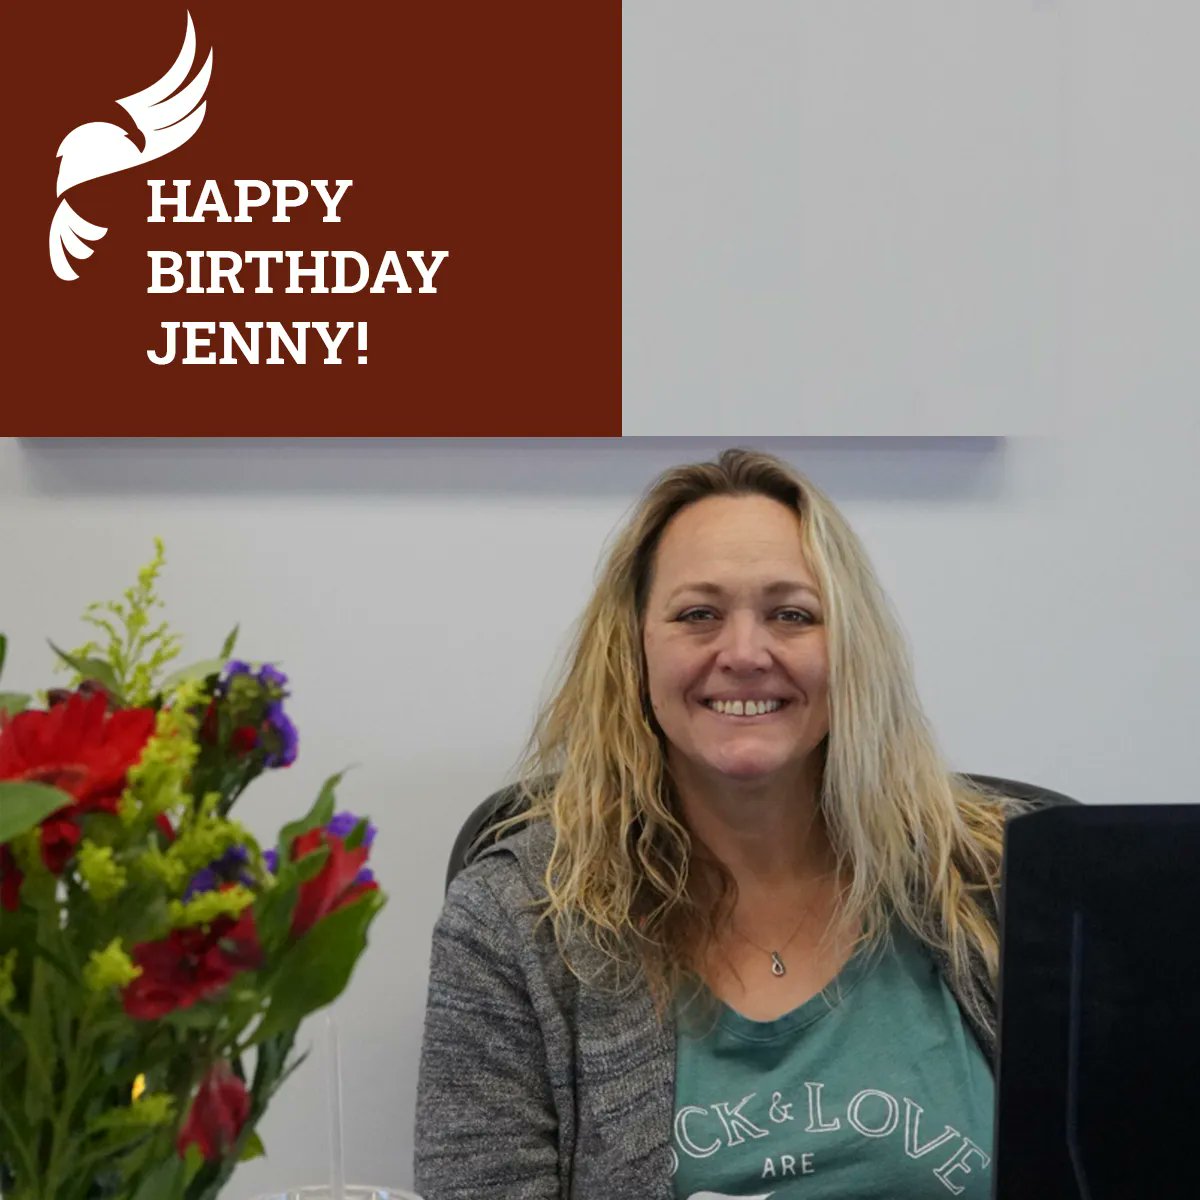 Wishing our Executive Assistant, Jenny, a very happy birthday! https://t.co/JDKqRDOUhY